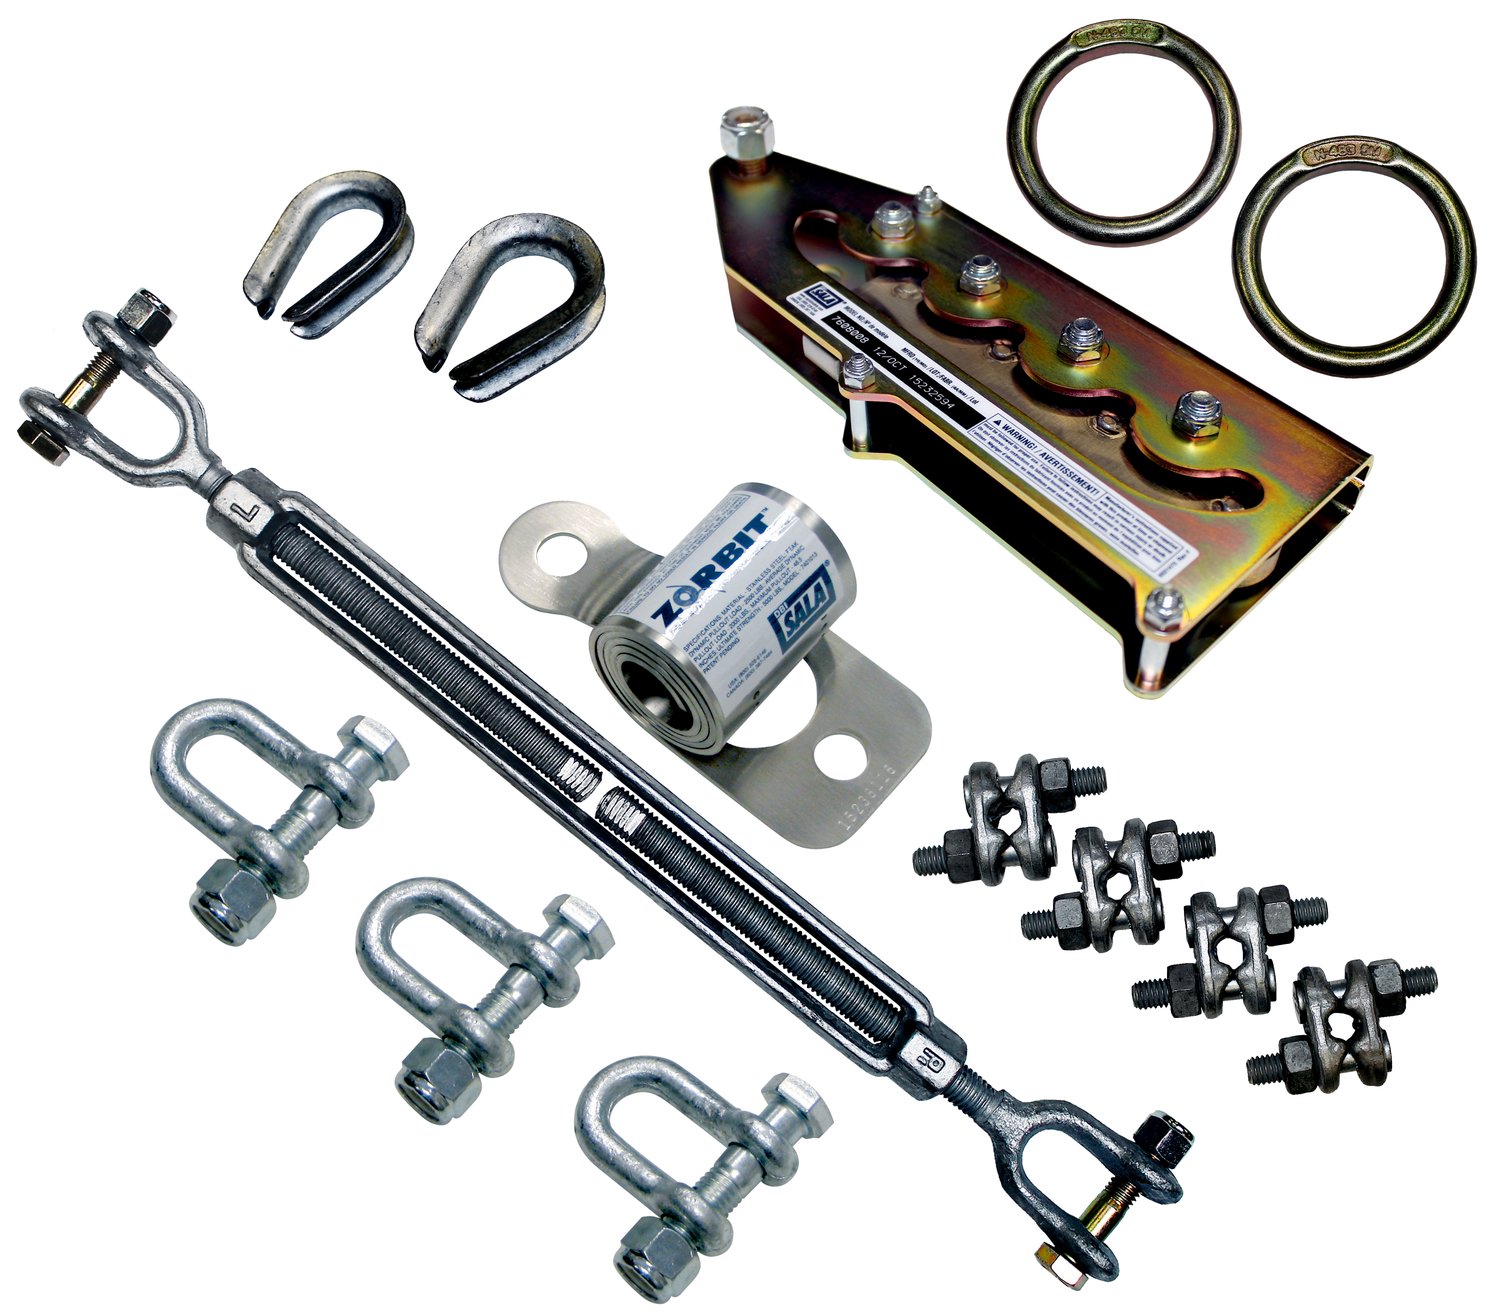 7100314308 - 3M DBI-SALA Metal Horizontal Lifeline Energy Absorber with Hardware
Kit 7600580, 3 Shackles, Turnbuckle, Cable Clips, Wedge Grip